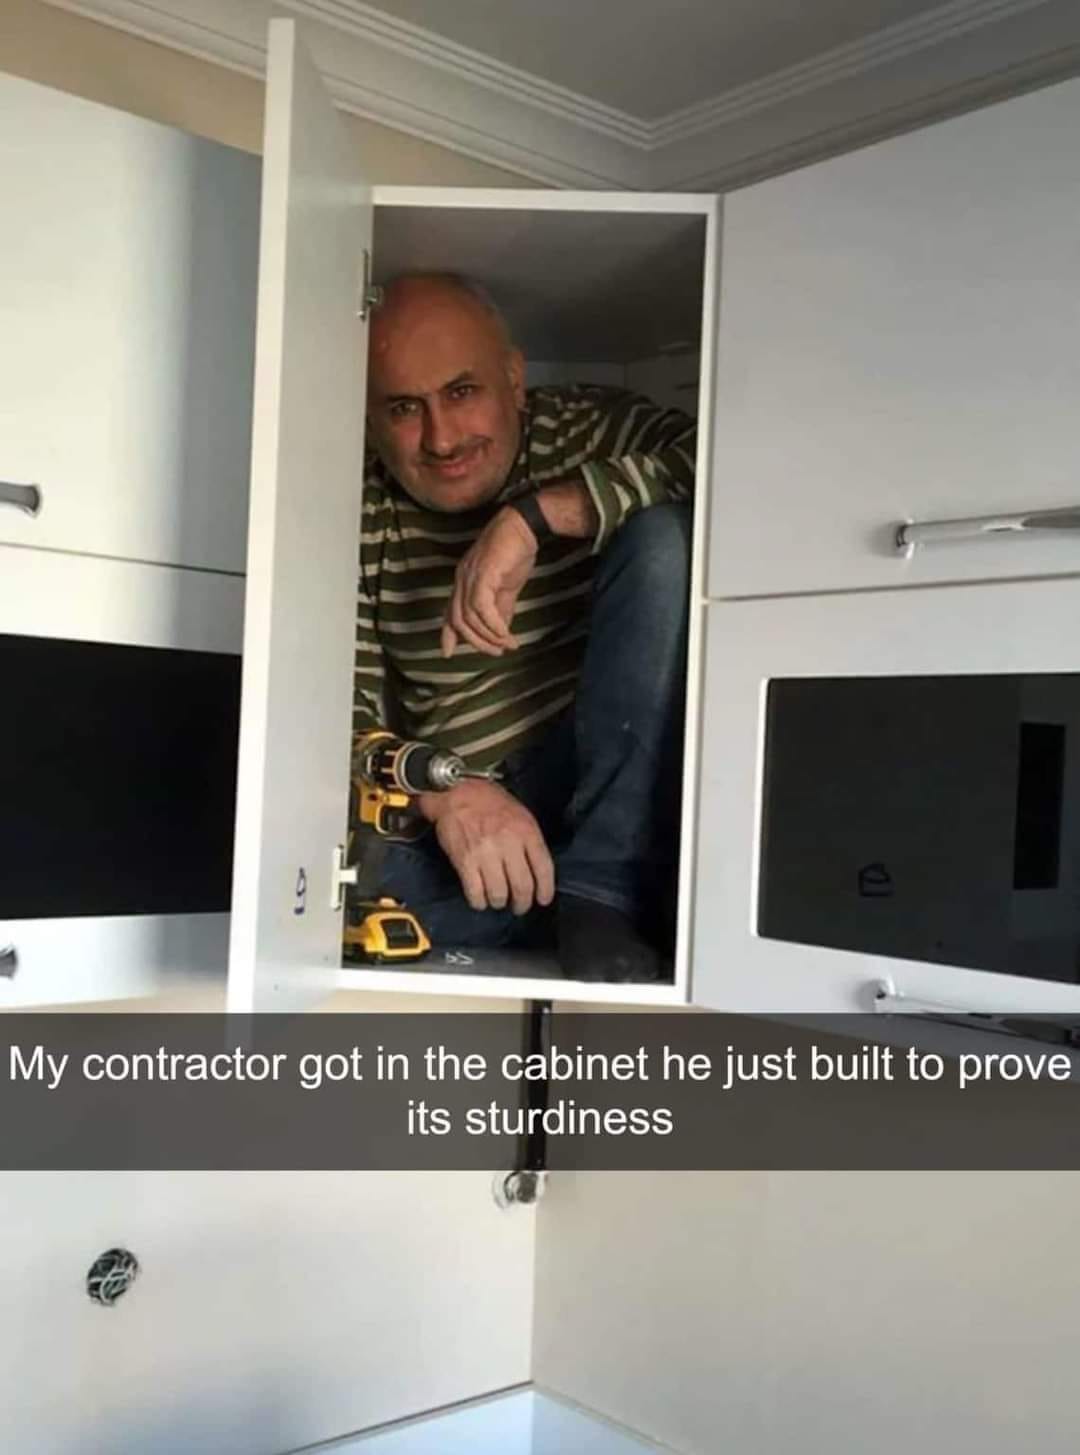 To My contractor got in the cabinet he just built to prove its sturdiness